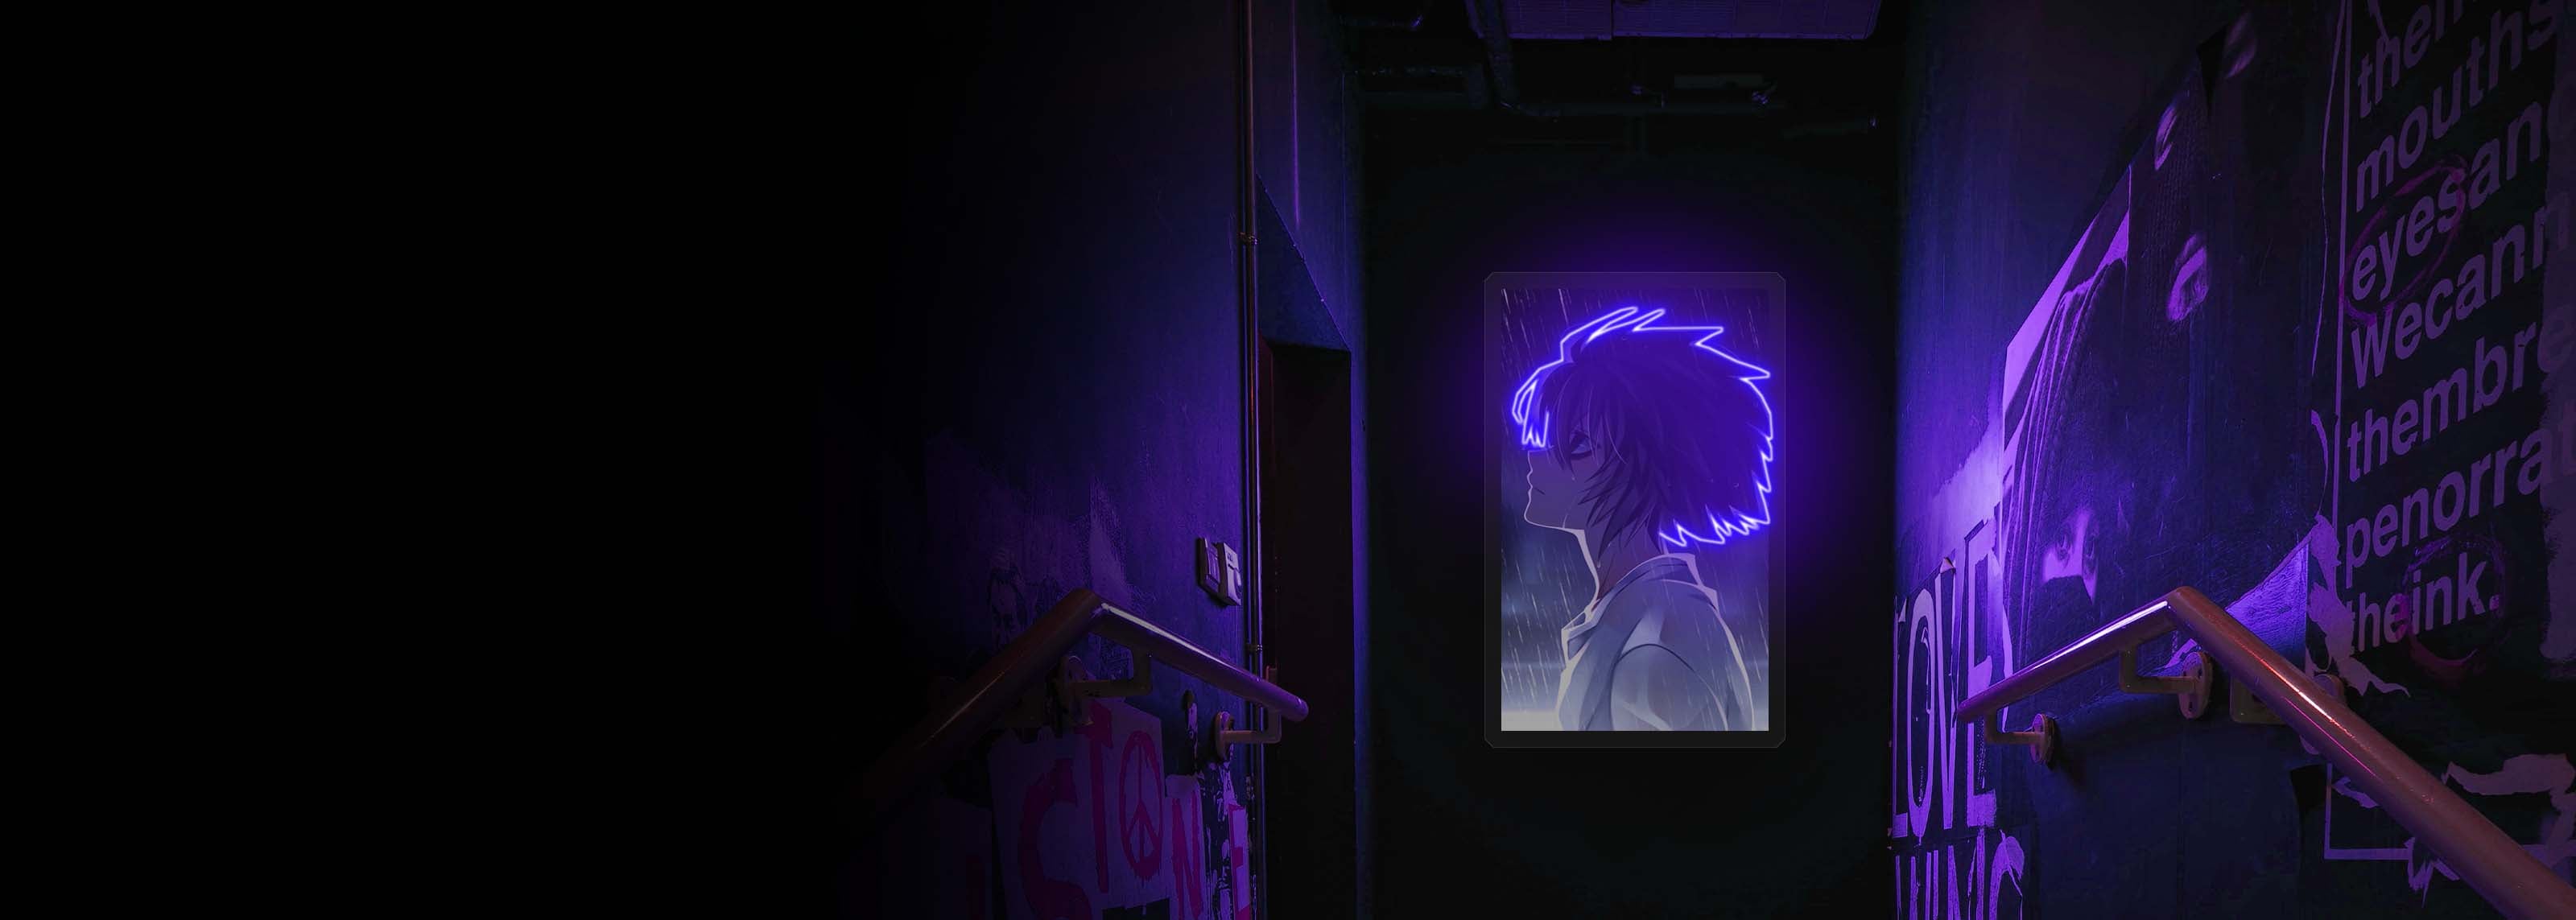 Anime LED neon poster glowing in a hallway